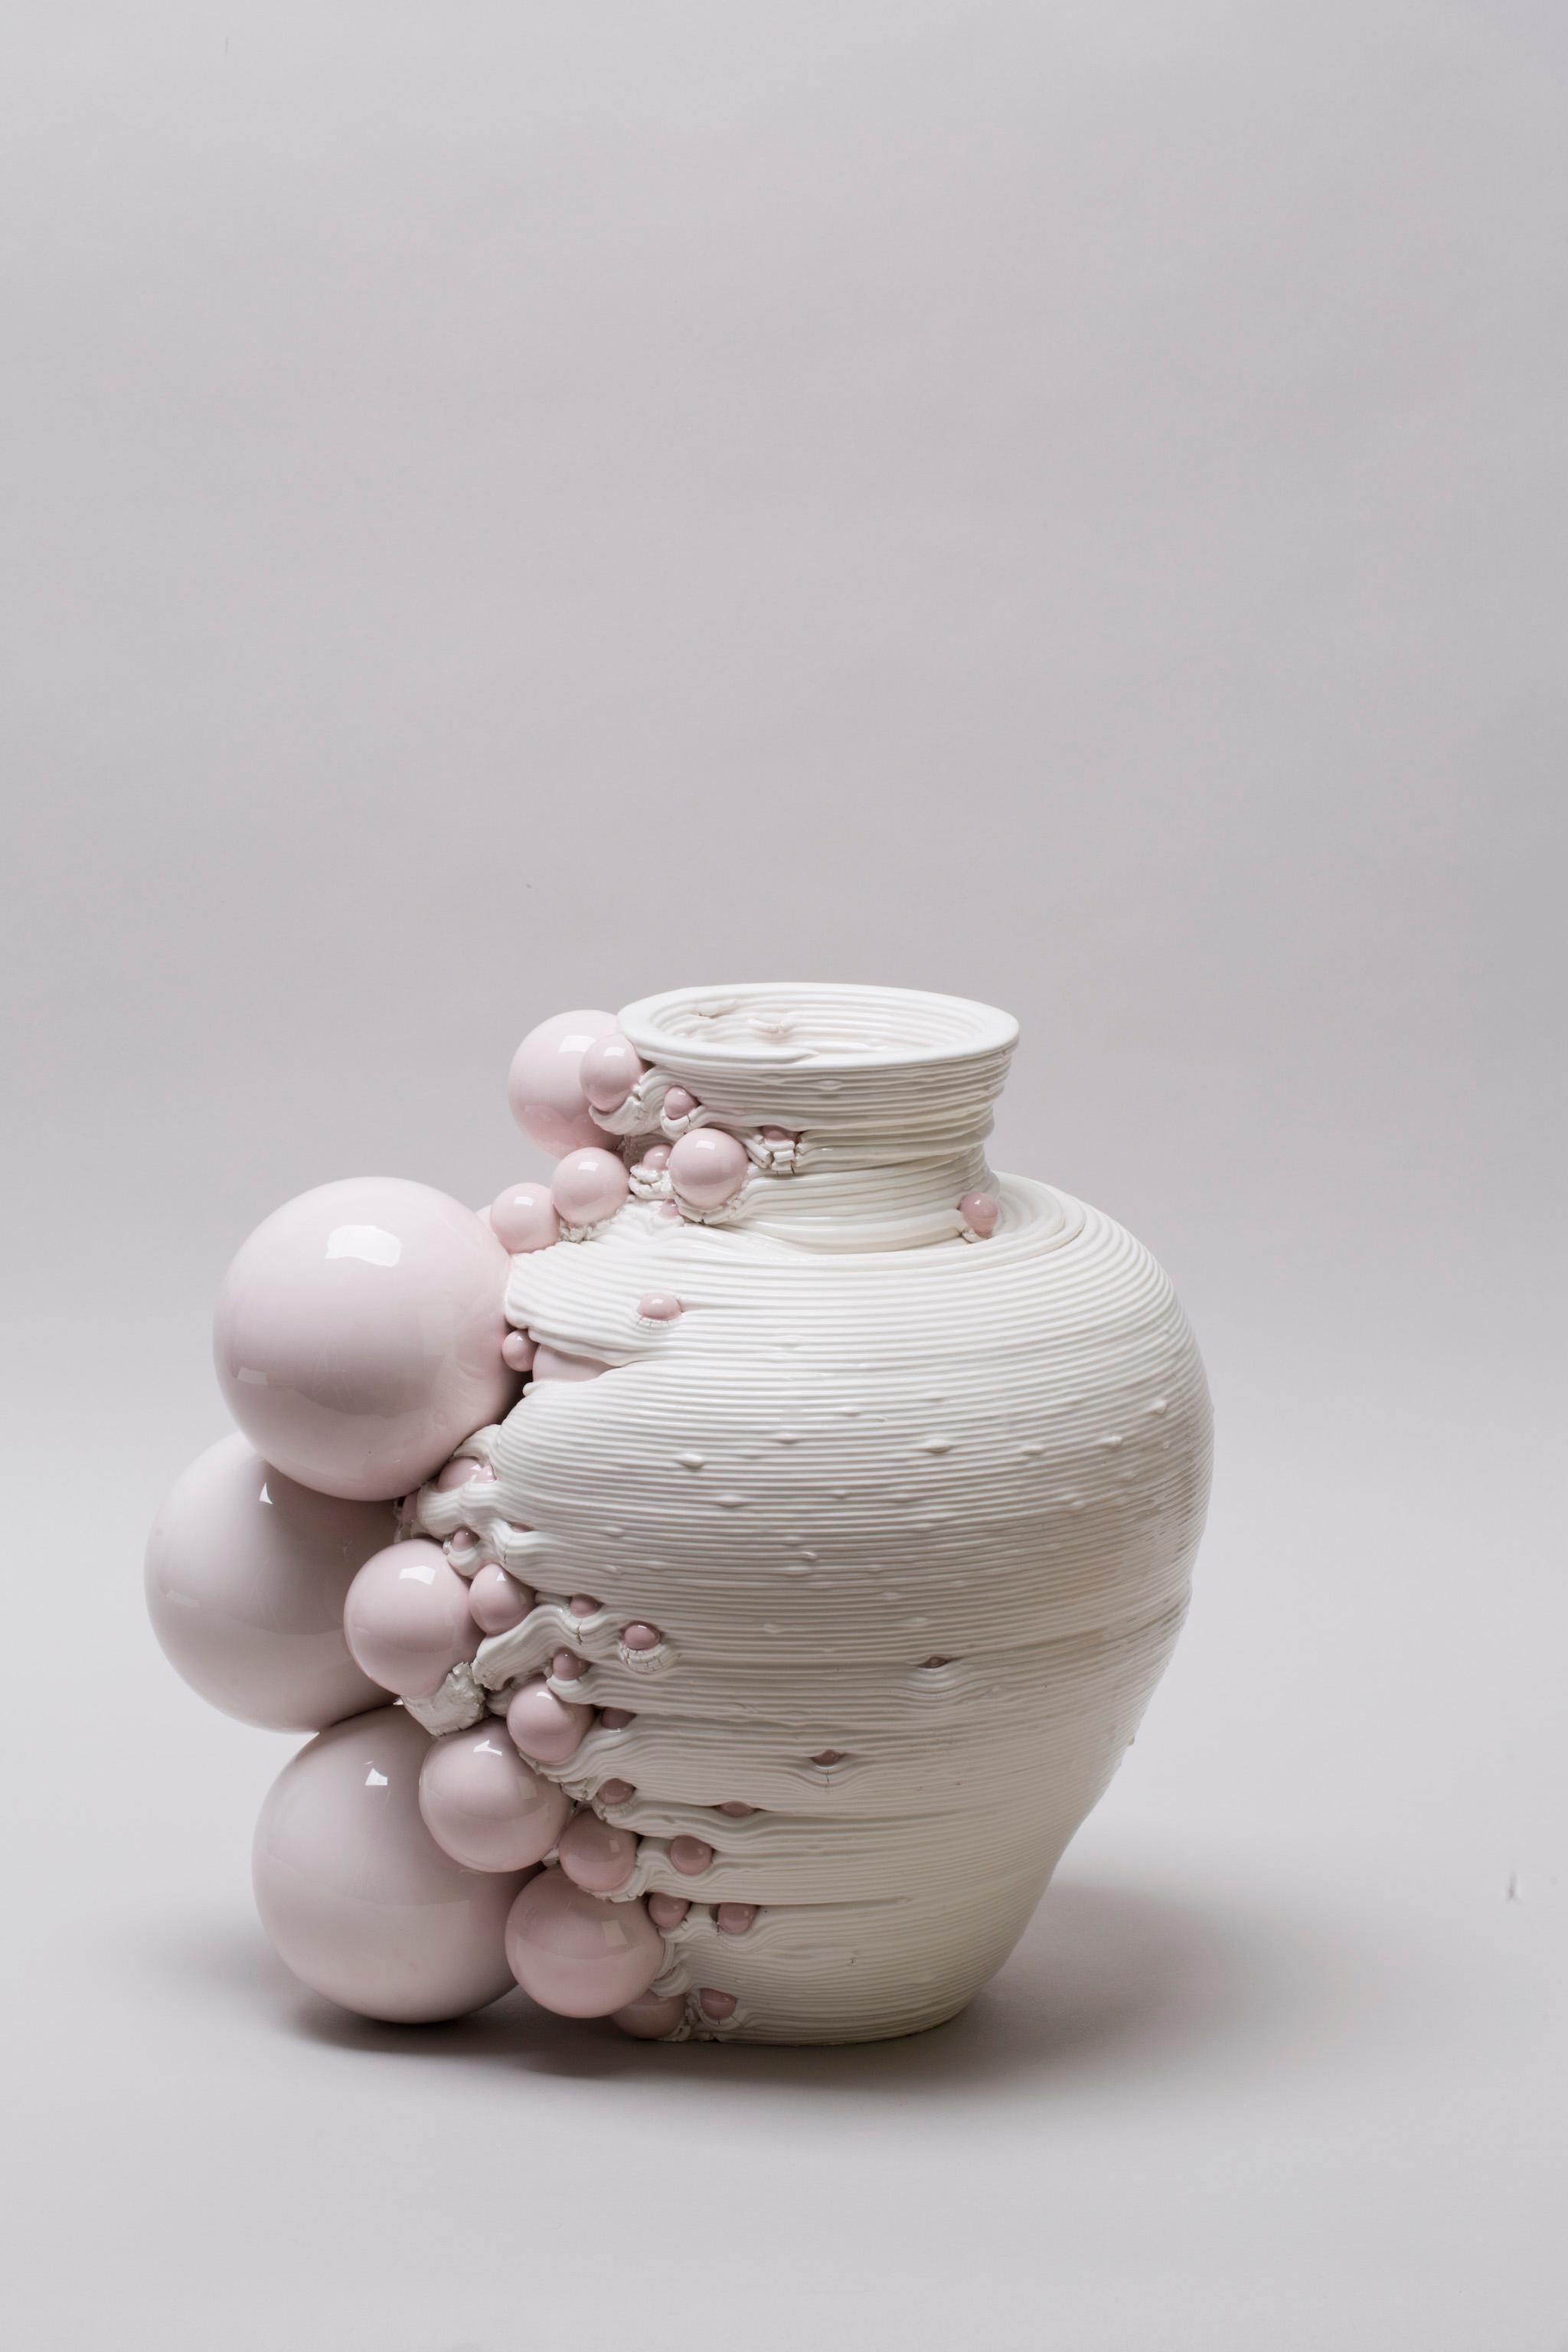 White 3D Printed Ceramic Sculptural Vase Italy Contemporary, 21st Century For Sale 3